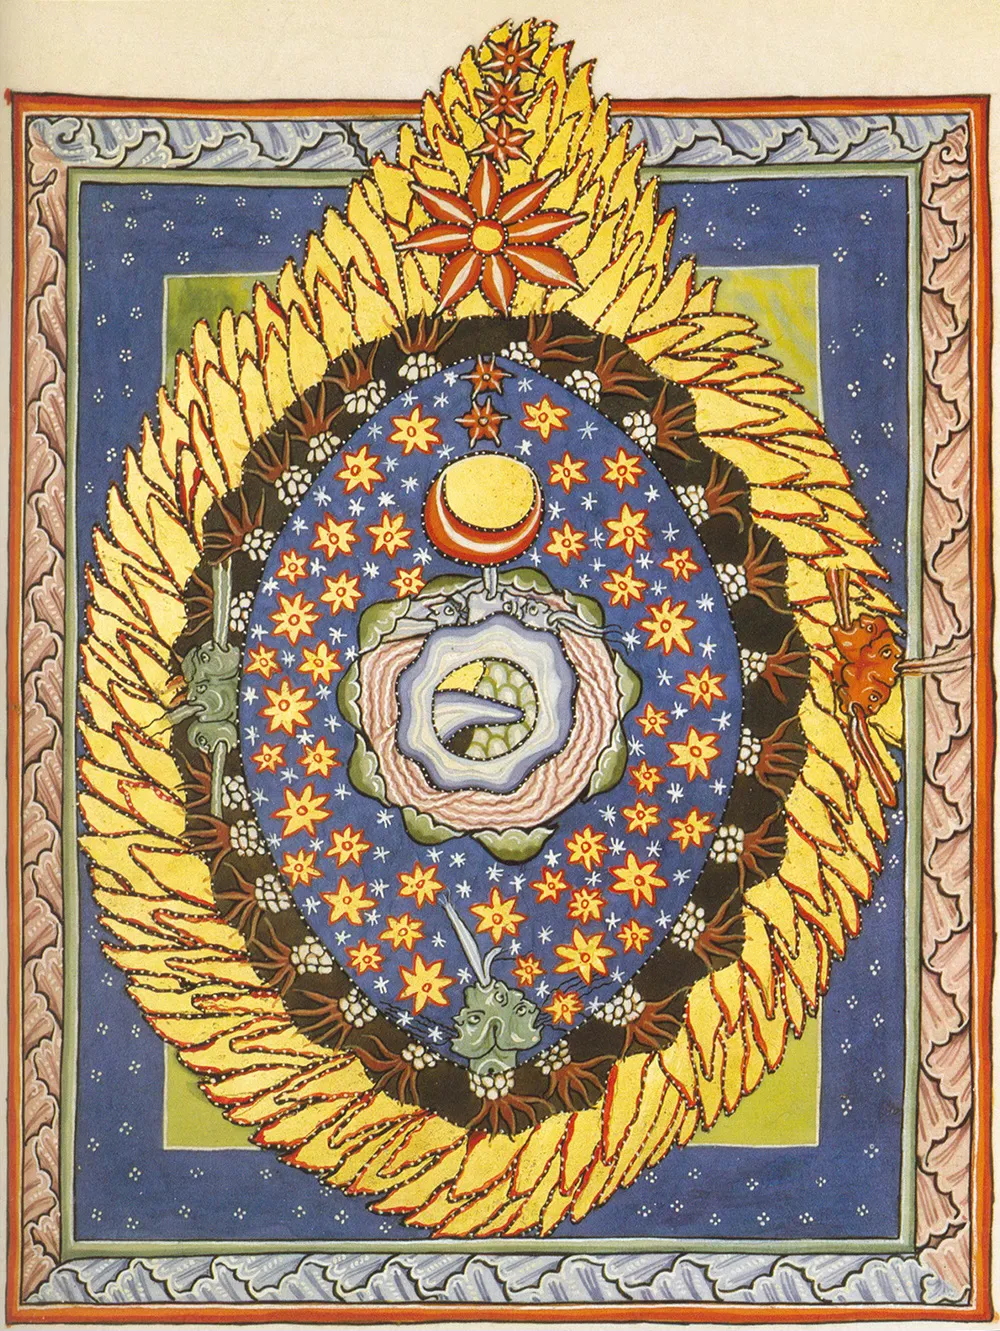 Manuscript illumination by Hildegard of Bingen resembling a visual disturbance similar to that experienced during a migraine